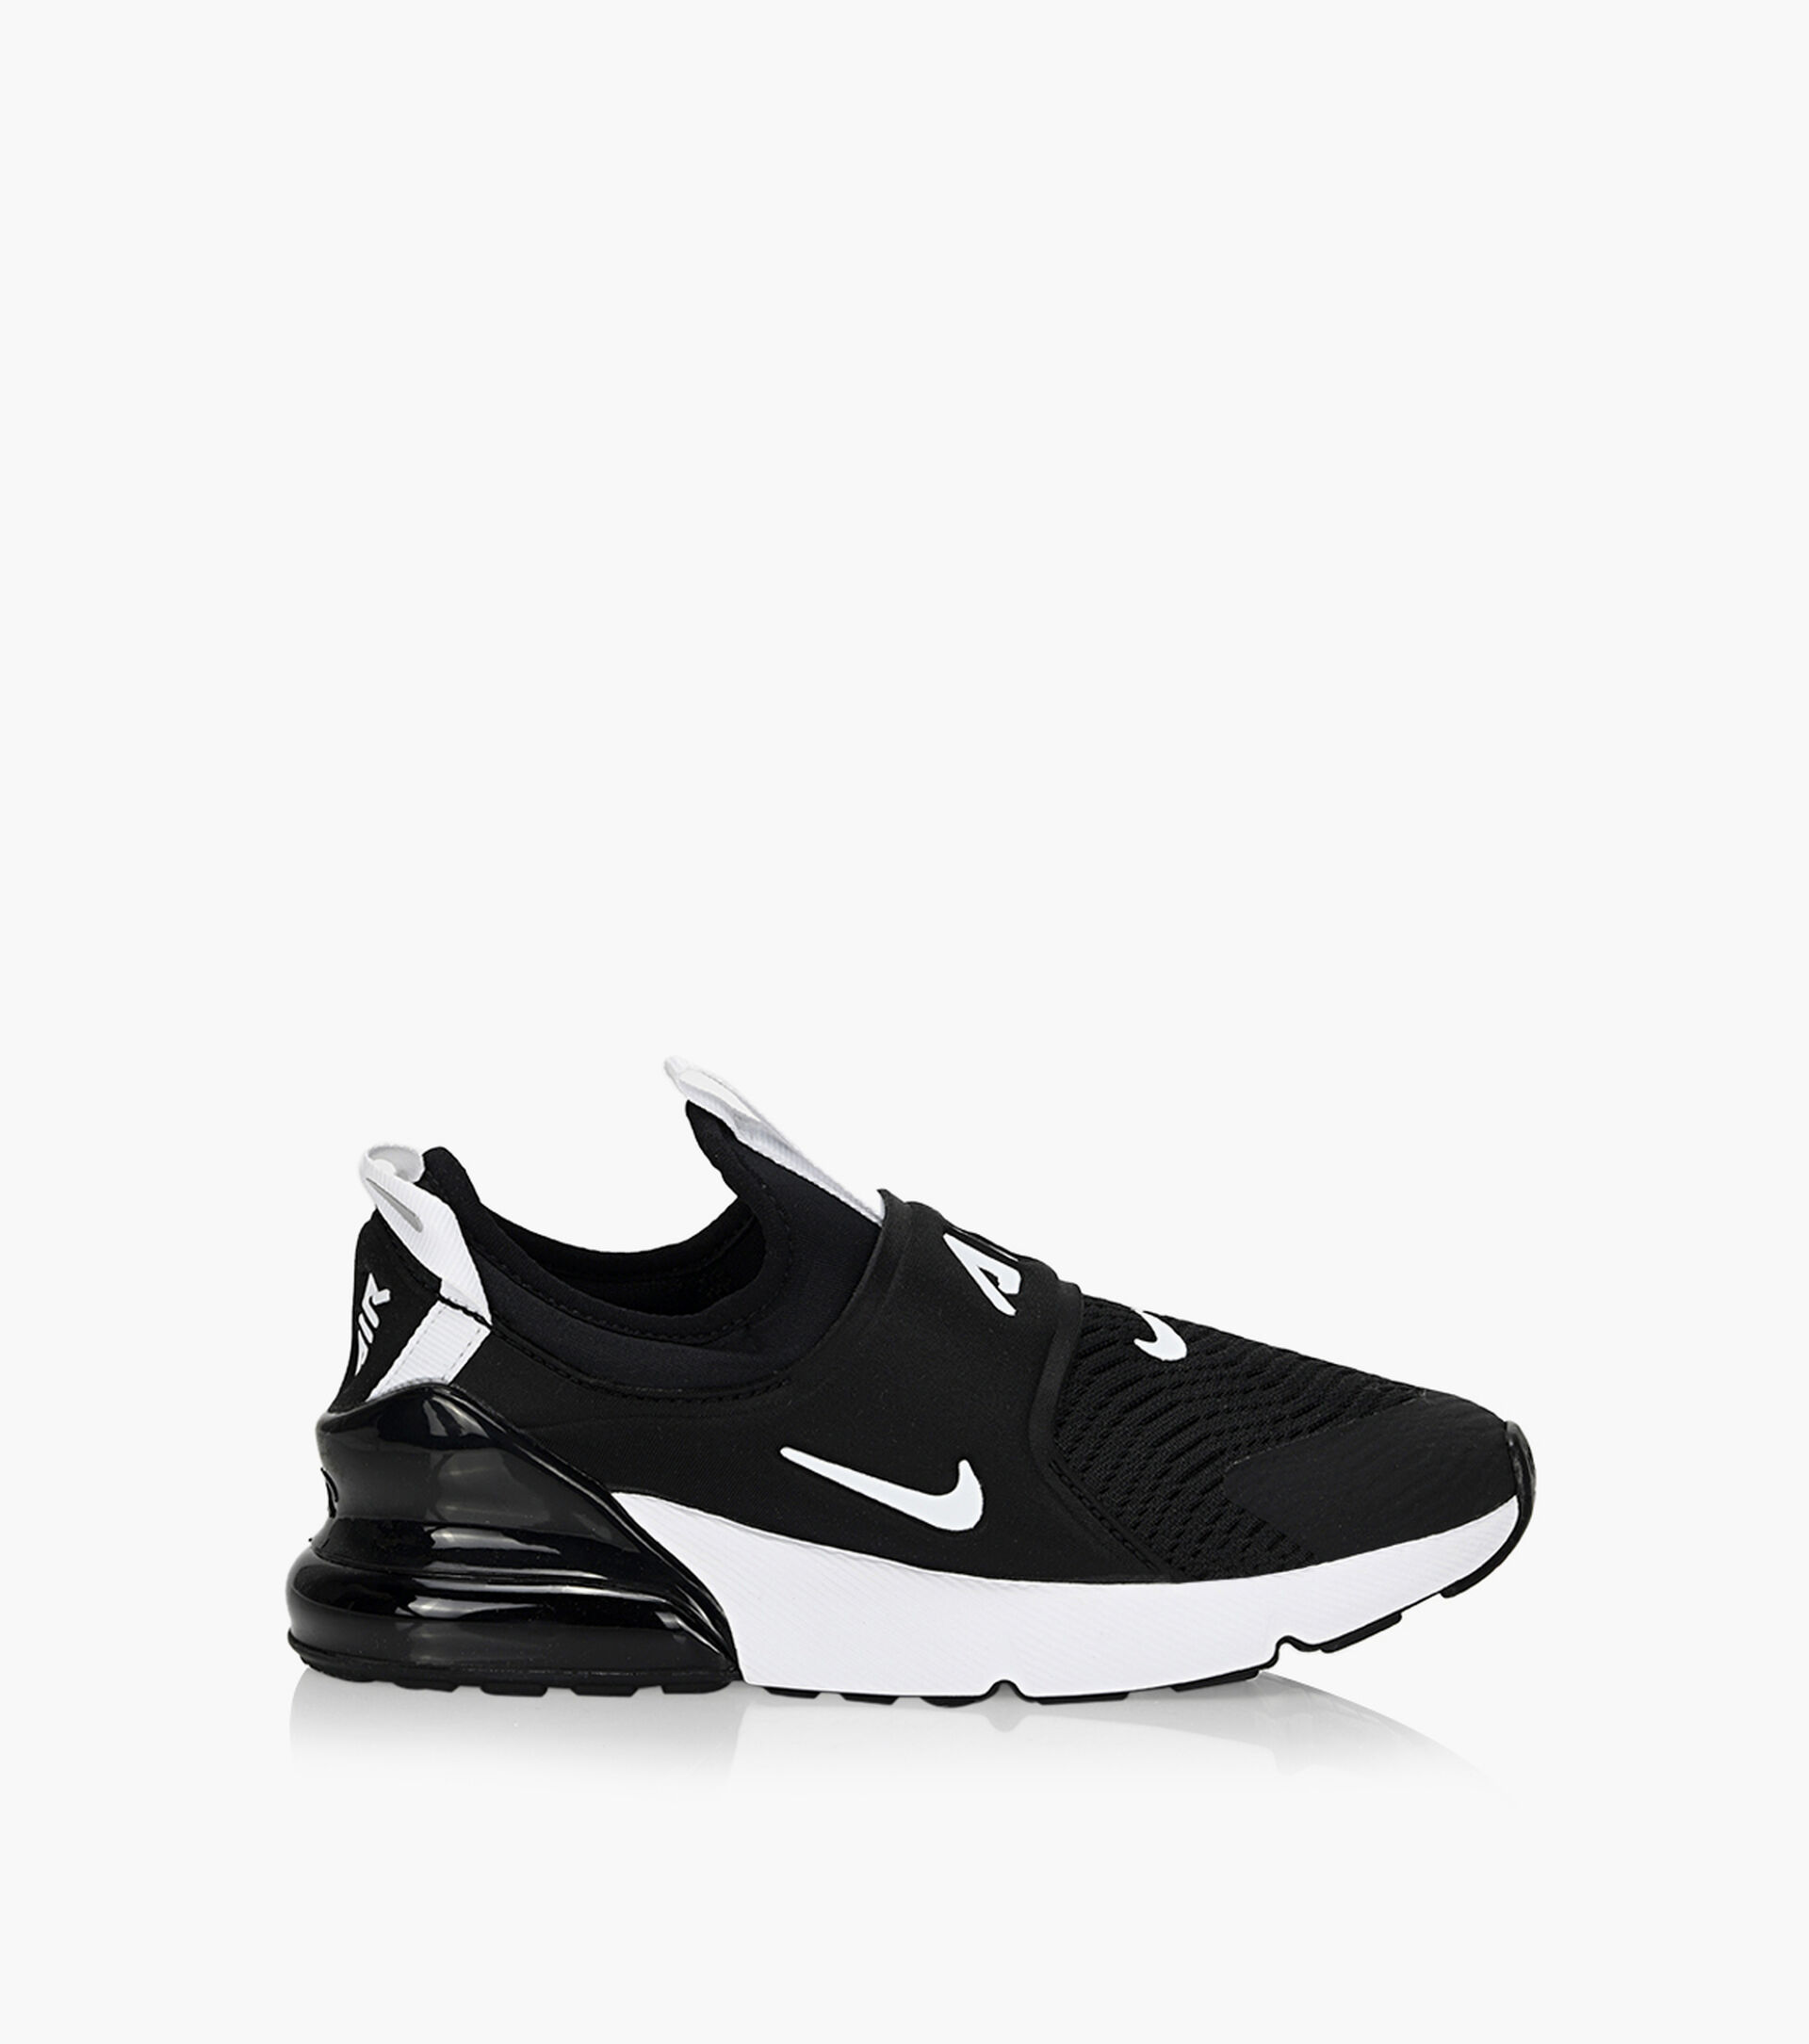 Nike 270 Pas Cher Taille 39 Cheapest Offers, 62% OFF | msistemas.net